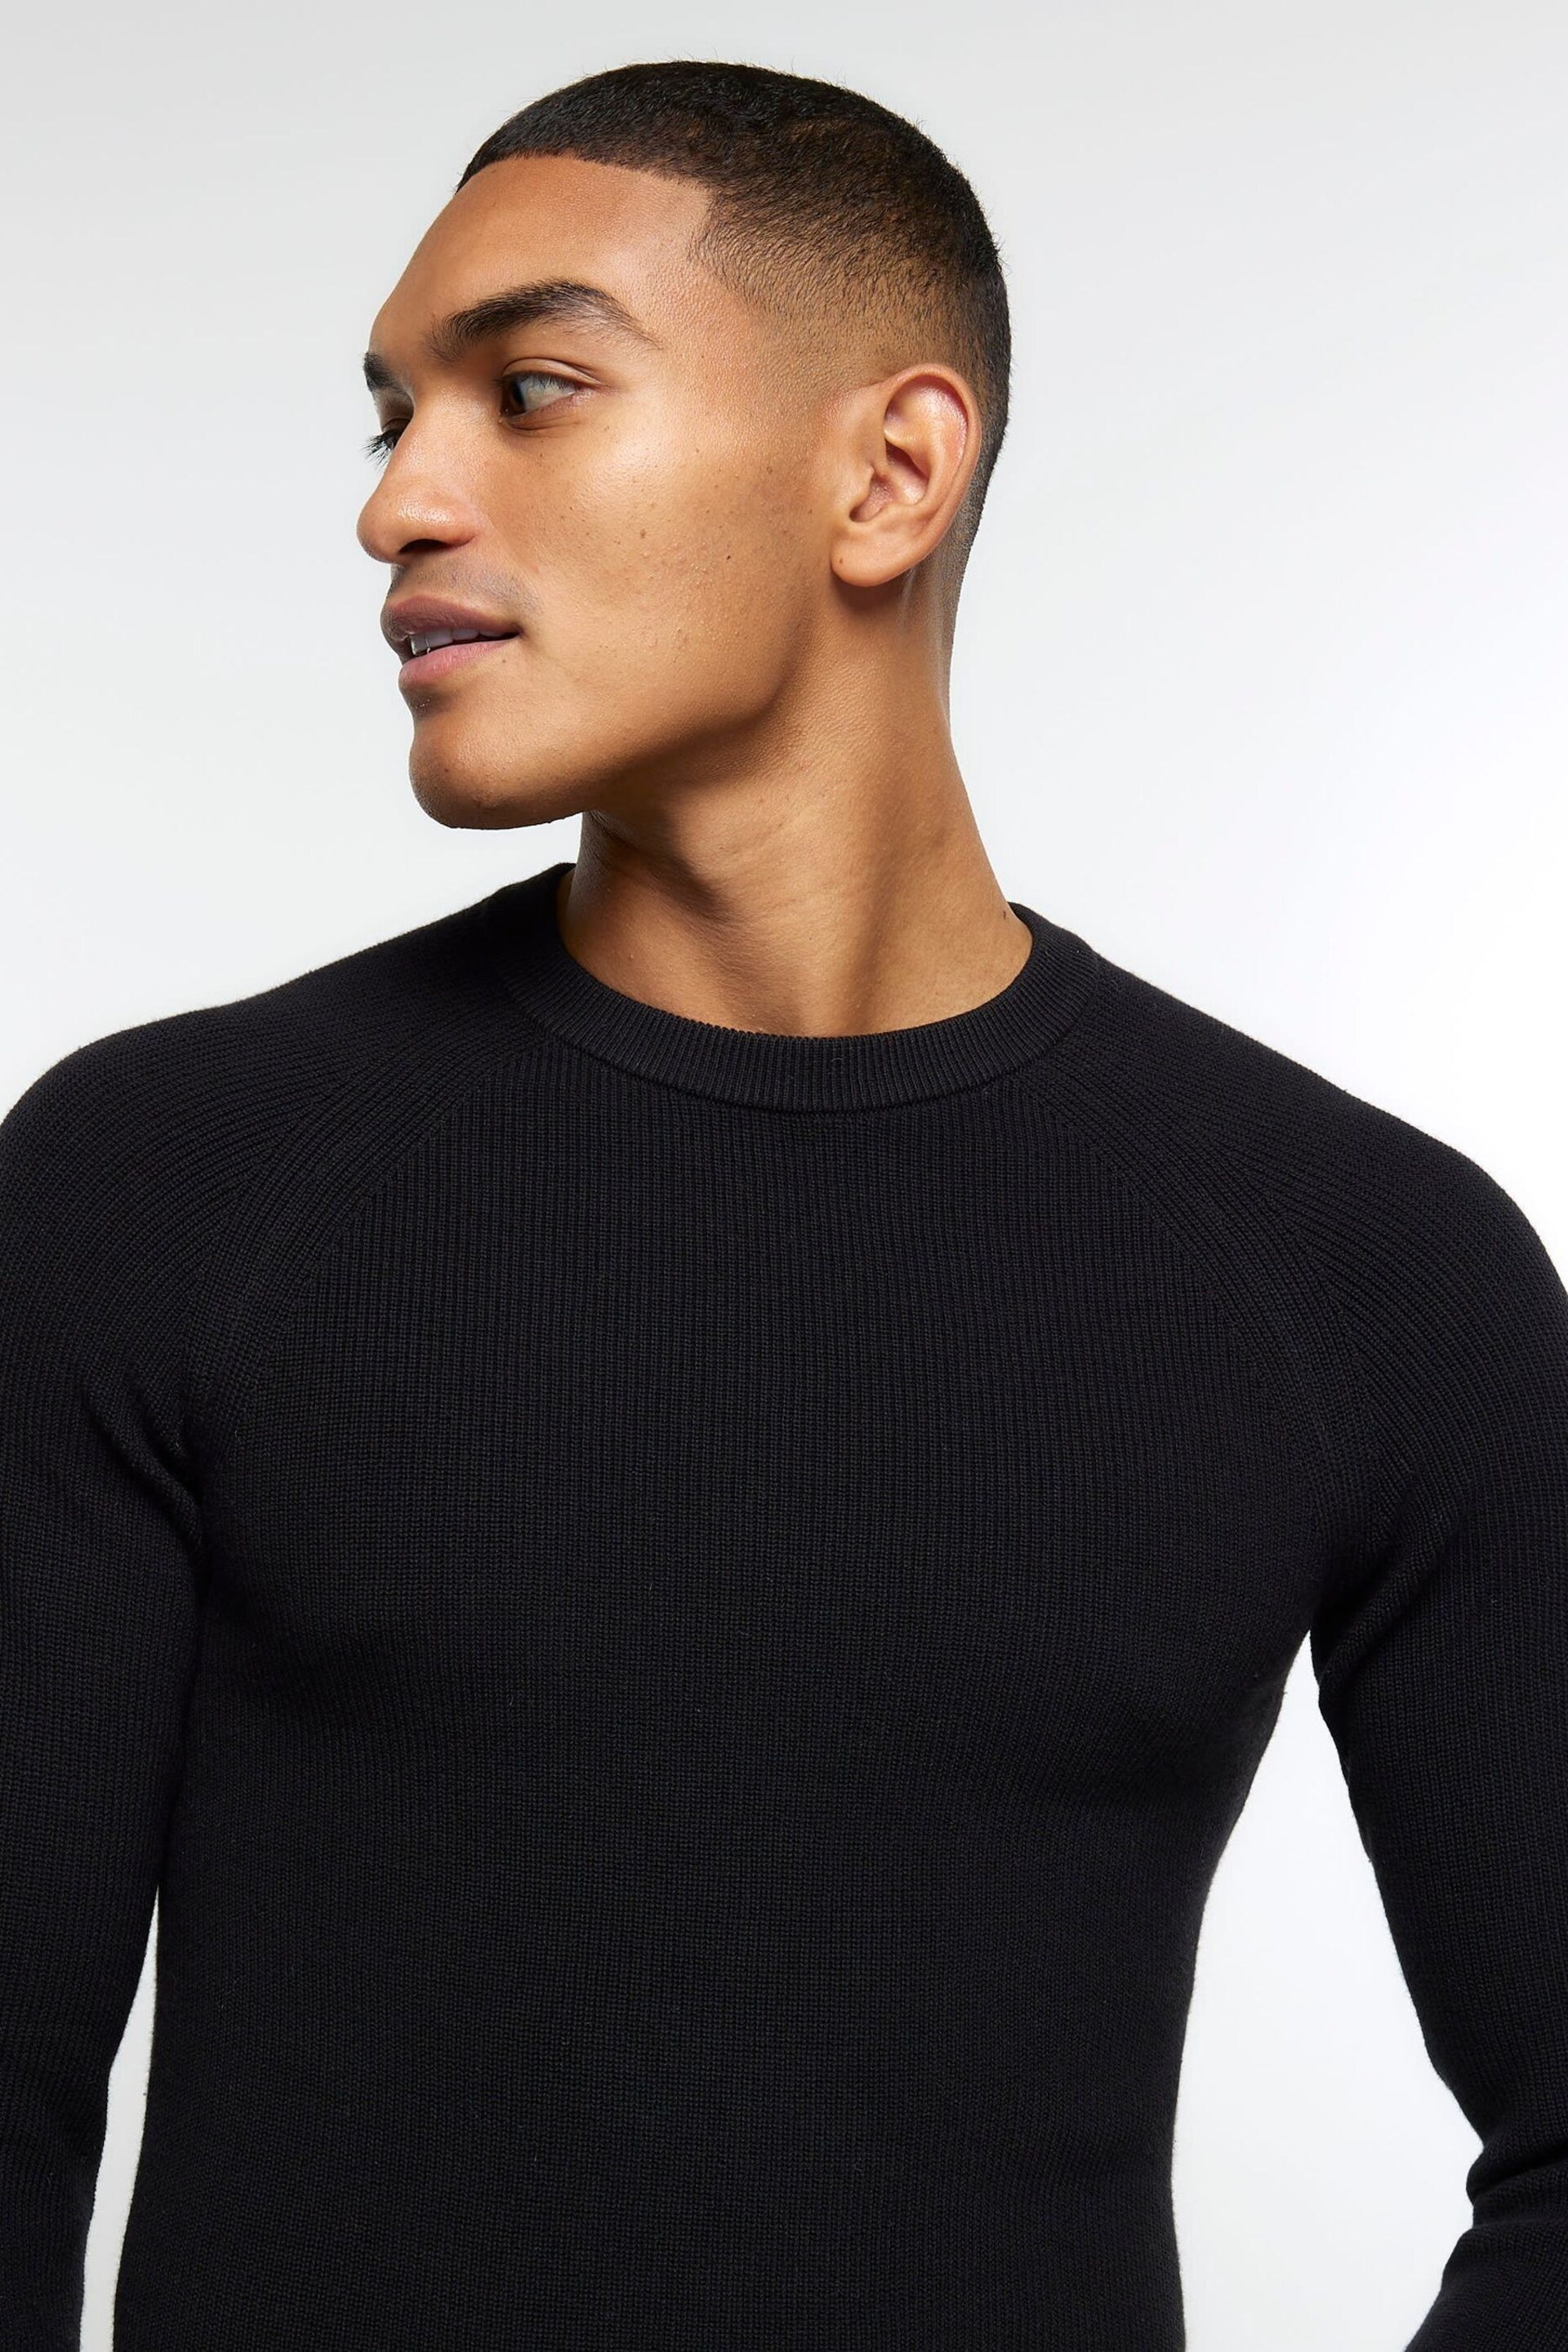 River Island Black Muscle Fit Rib Crew Jumper - Image 4 of 6